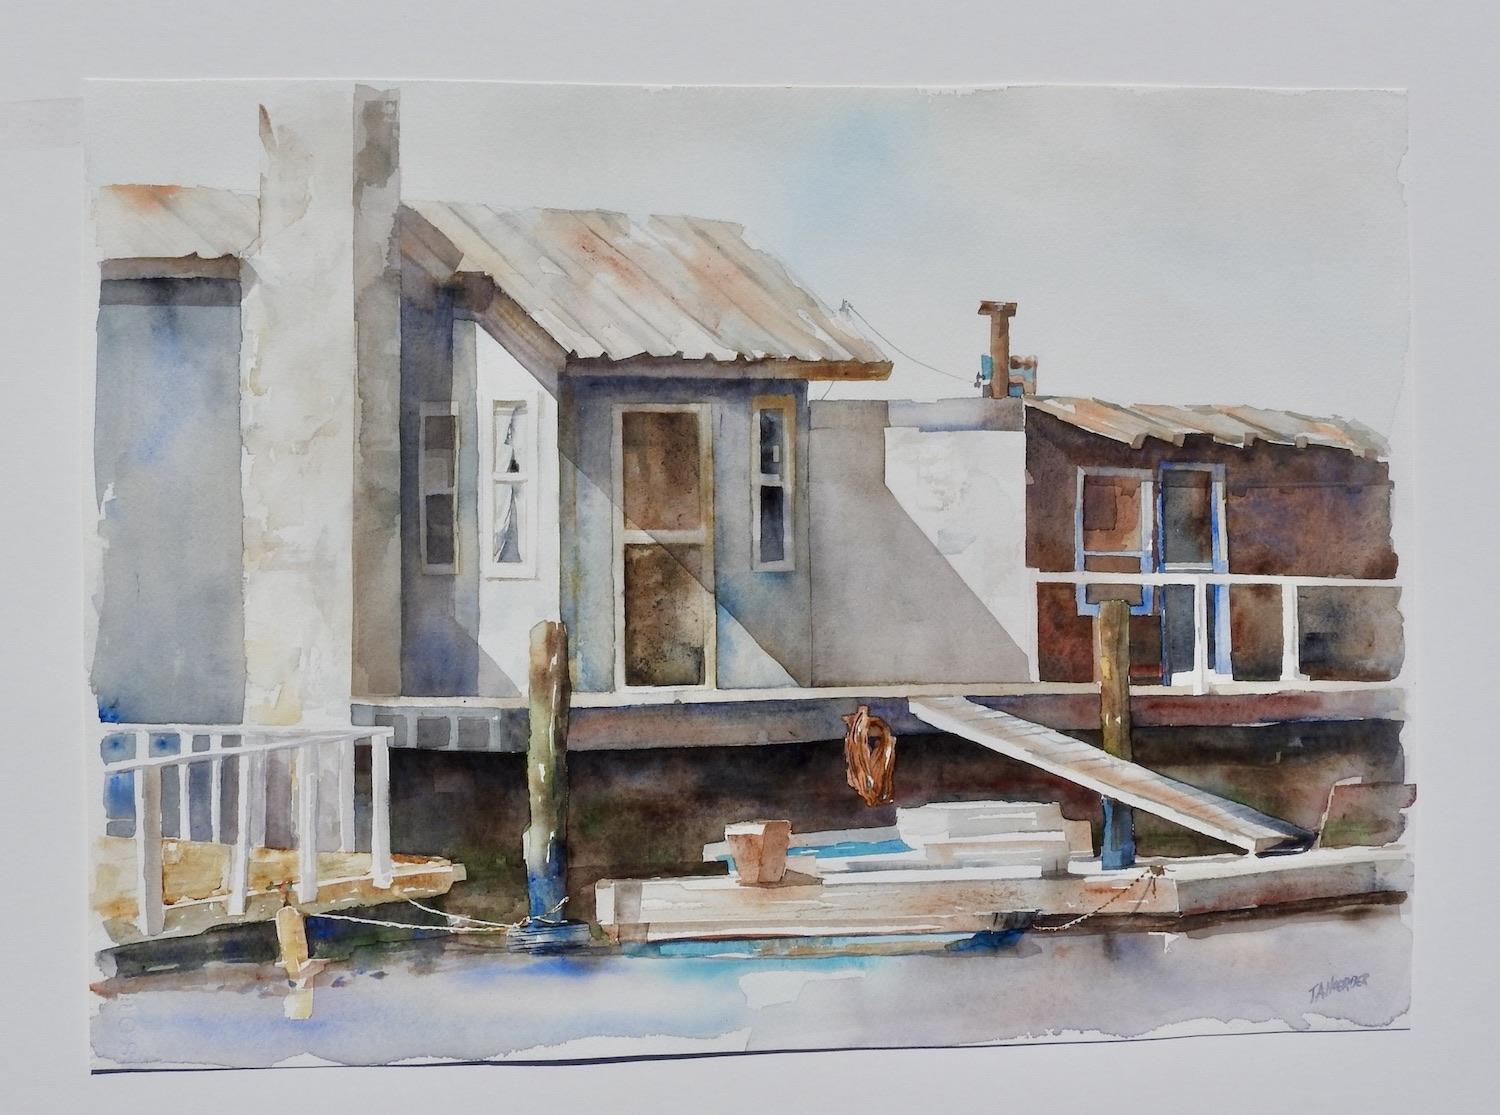 <p>Artist Comments<br>In the San Francisco Bay, just beyond Sausalito, weathered shacks stand abandoned along the water's edge. The sun peeks through the overcast sky, casting enchanting hues and soft shadows. The scene exudes a rugged and timeless